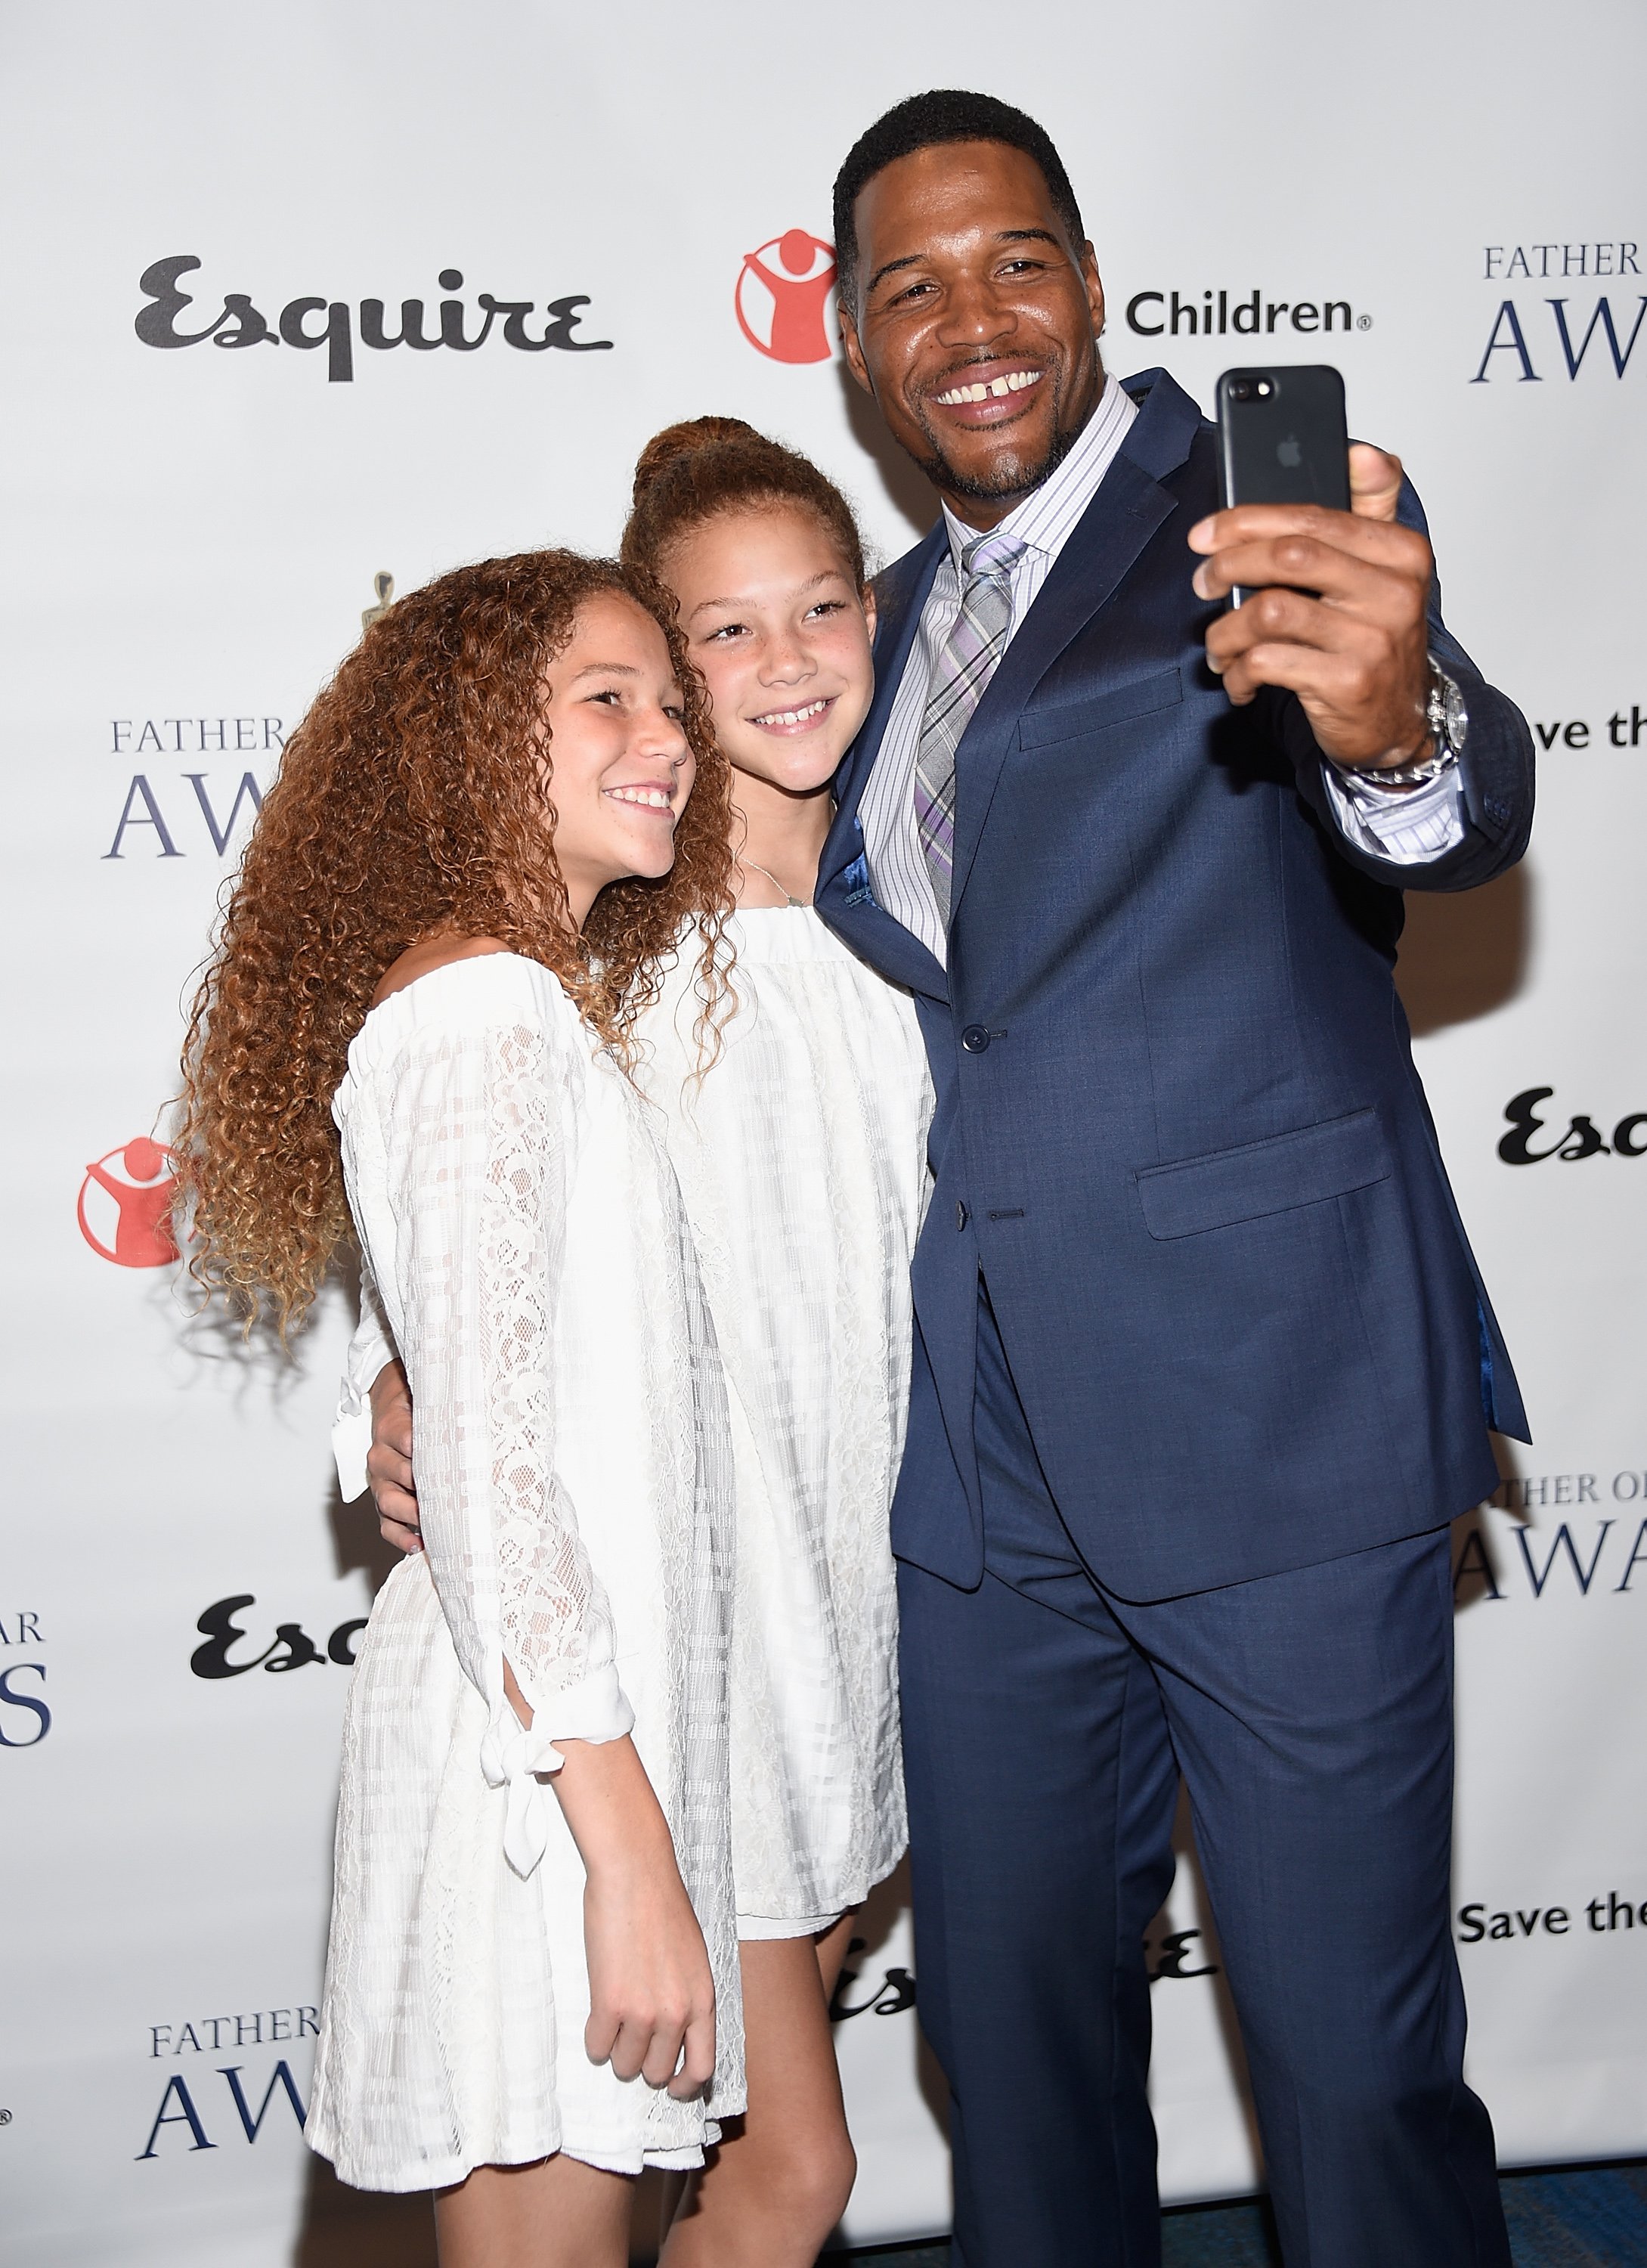 Michael Strahan with daughters Isabella Strahan and Sophia Strahan attend The 76th Annual Father Of The Year Awards at New York Hilton on June 15, 2017 in New York City. | Source: Getty Images 